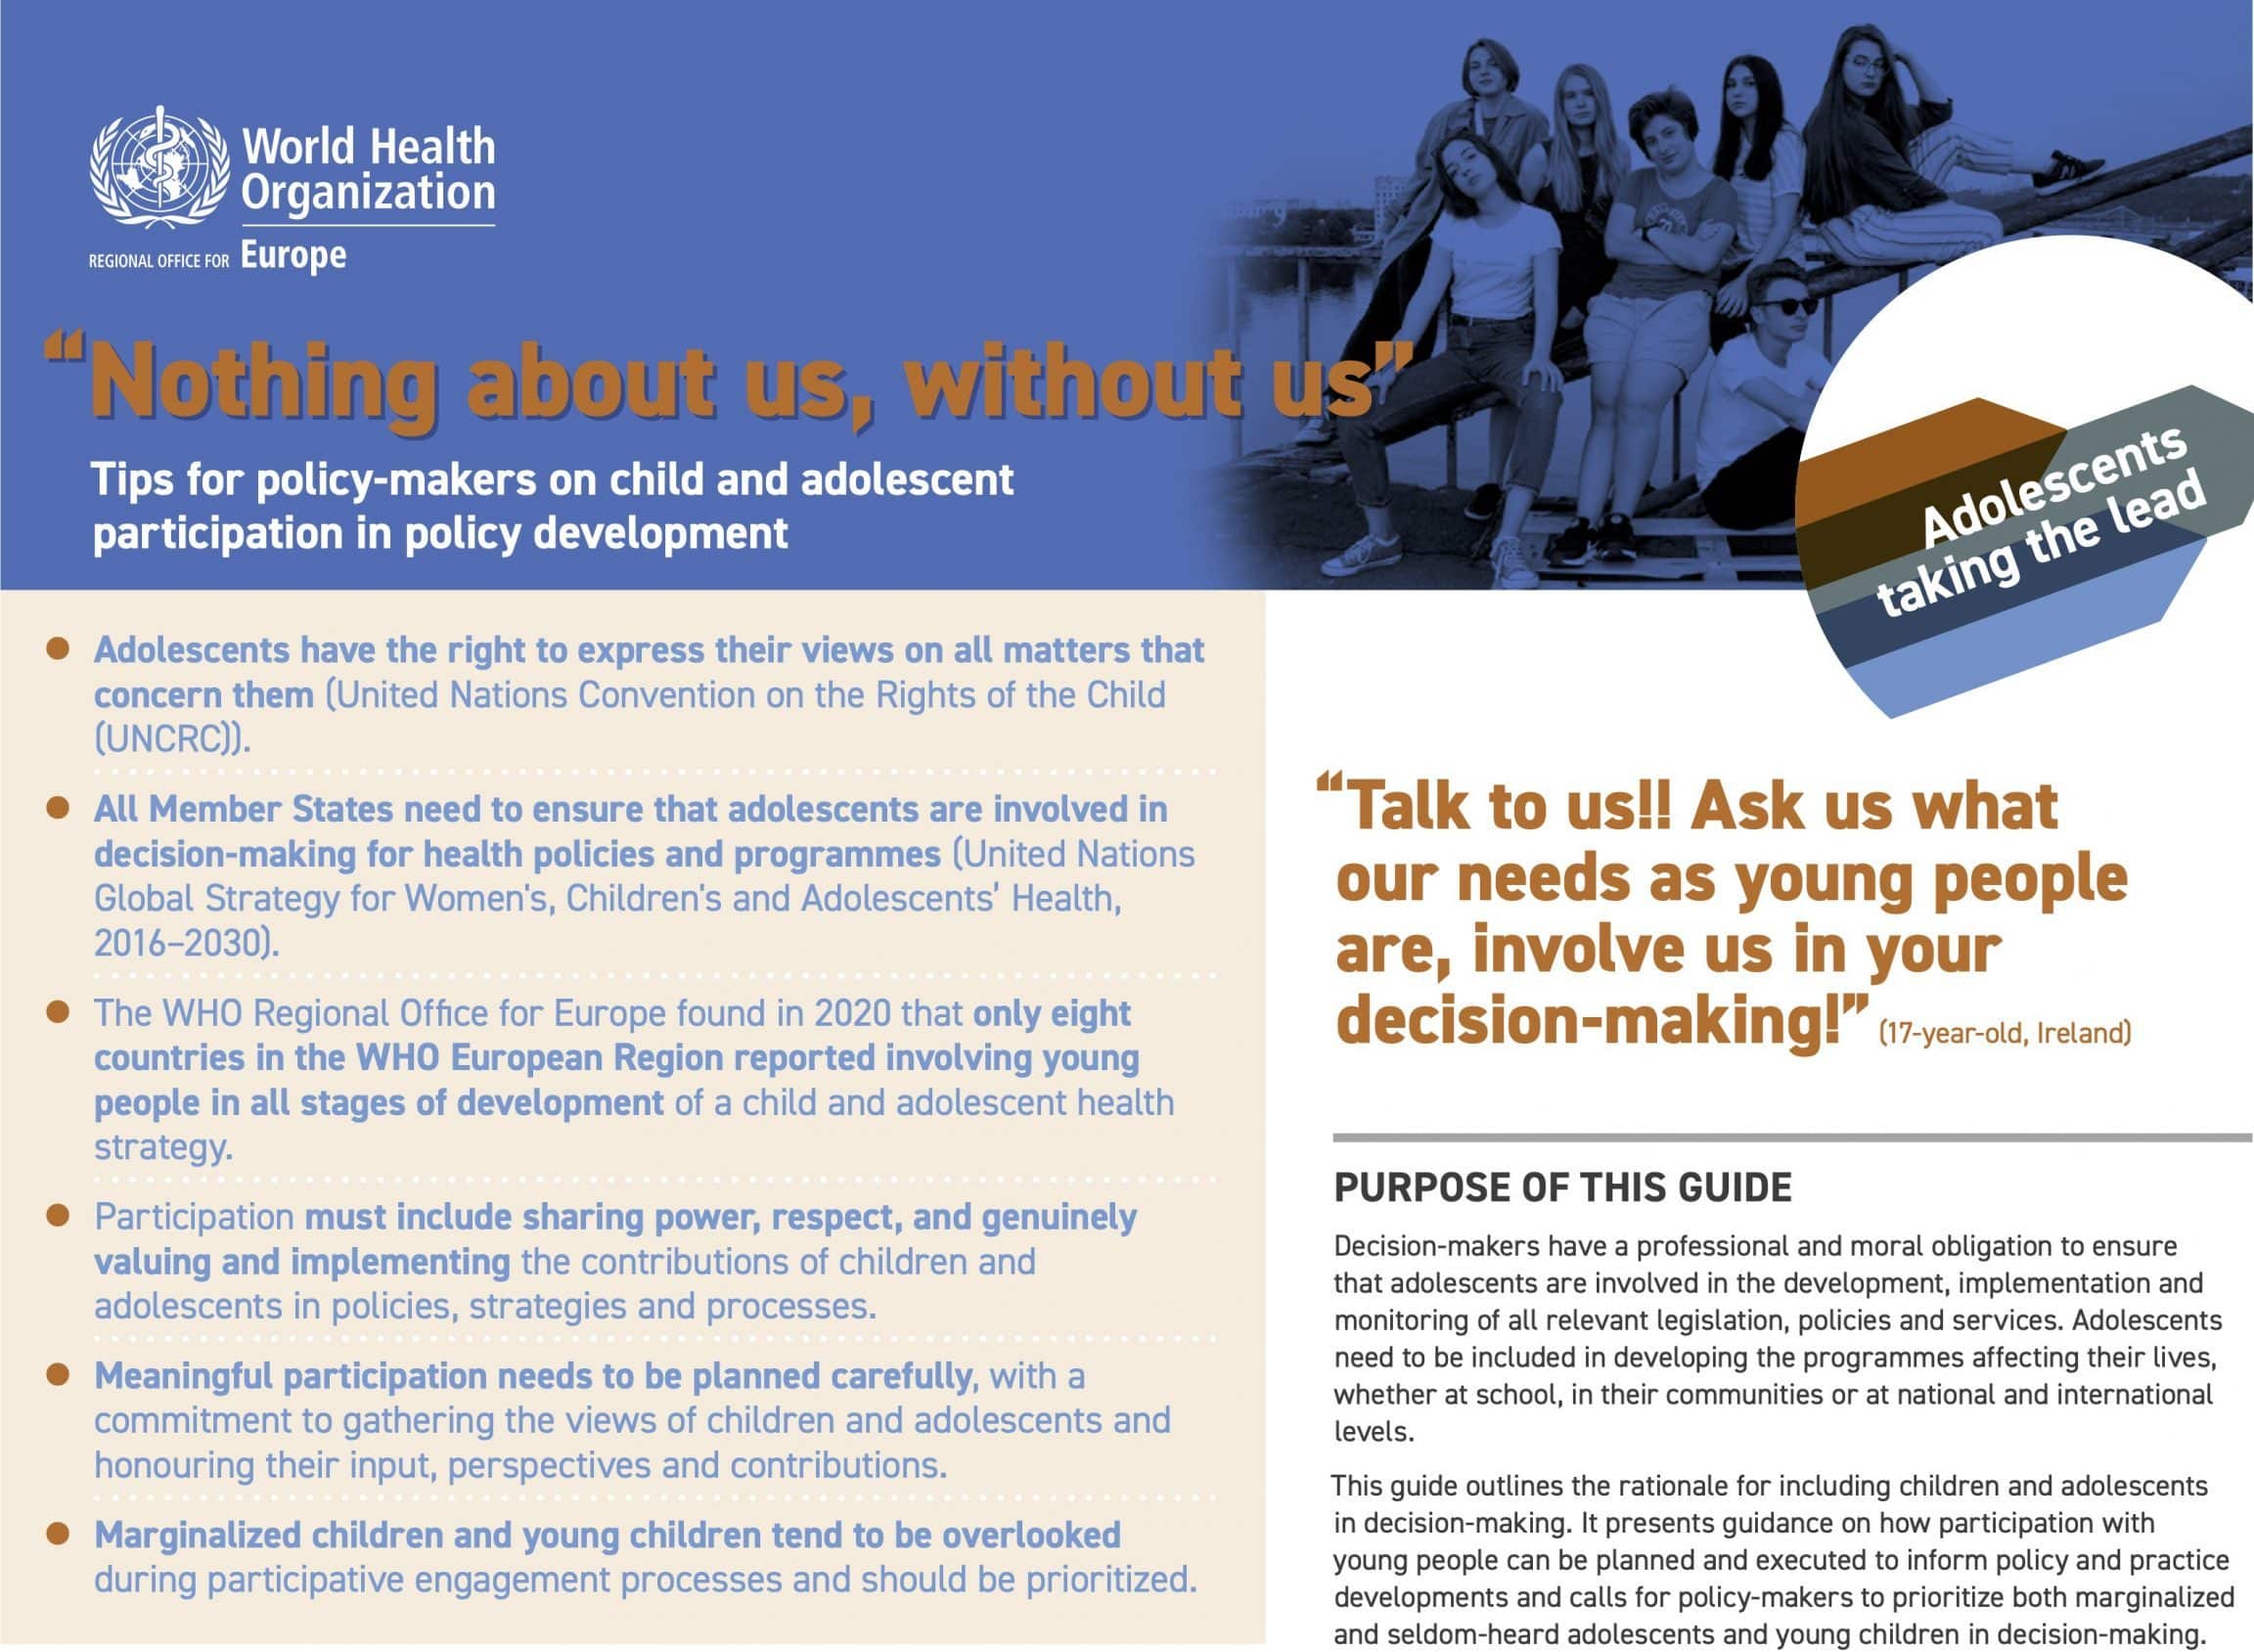 “Nothing about us, without us”. Tips for policy-makers on child and adolescent participation in policy development